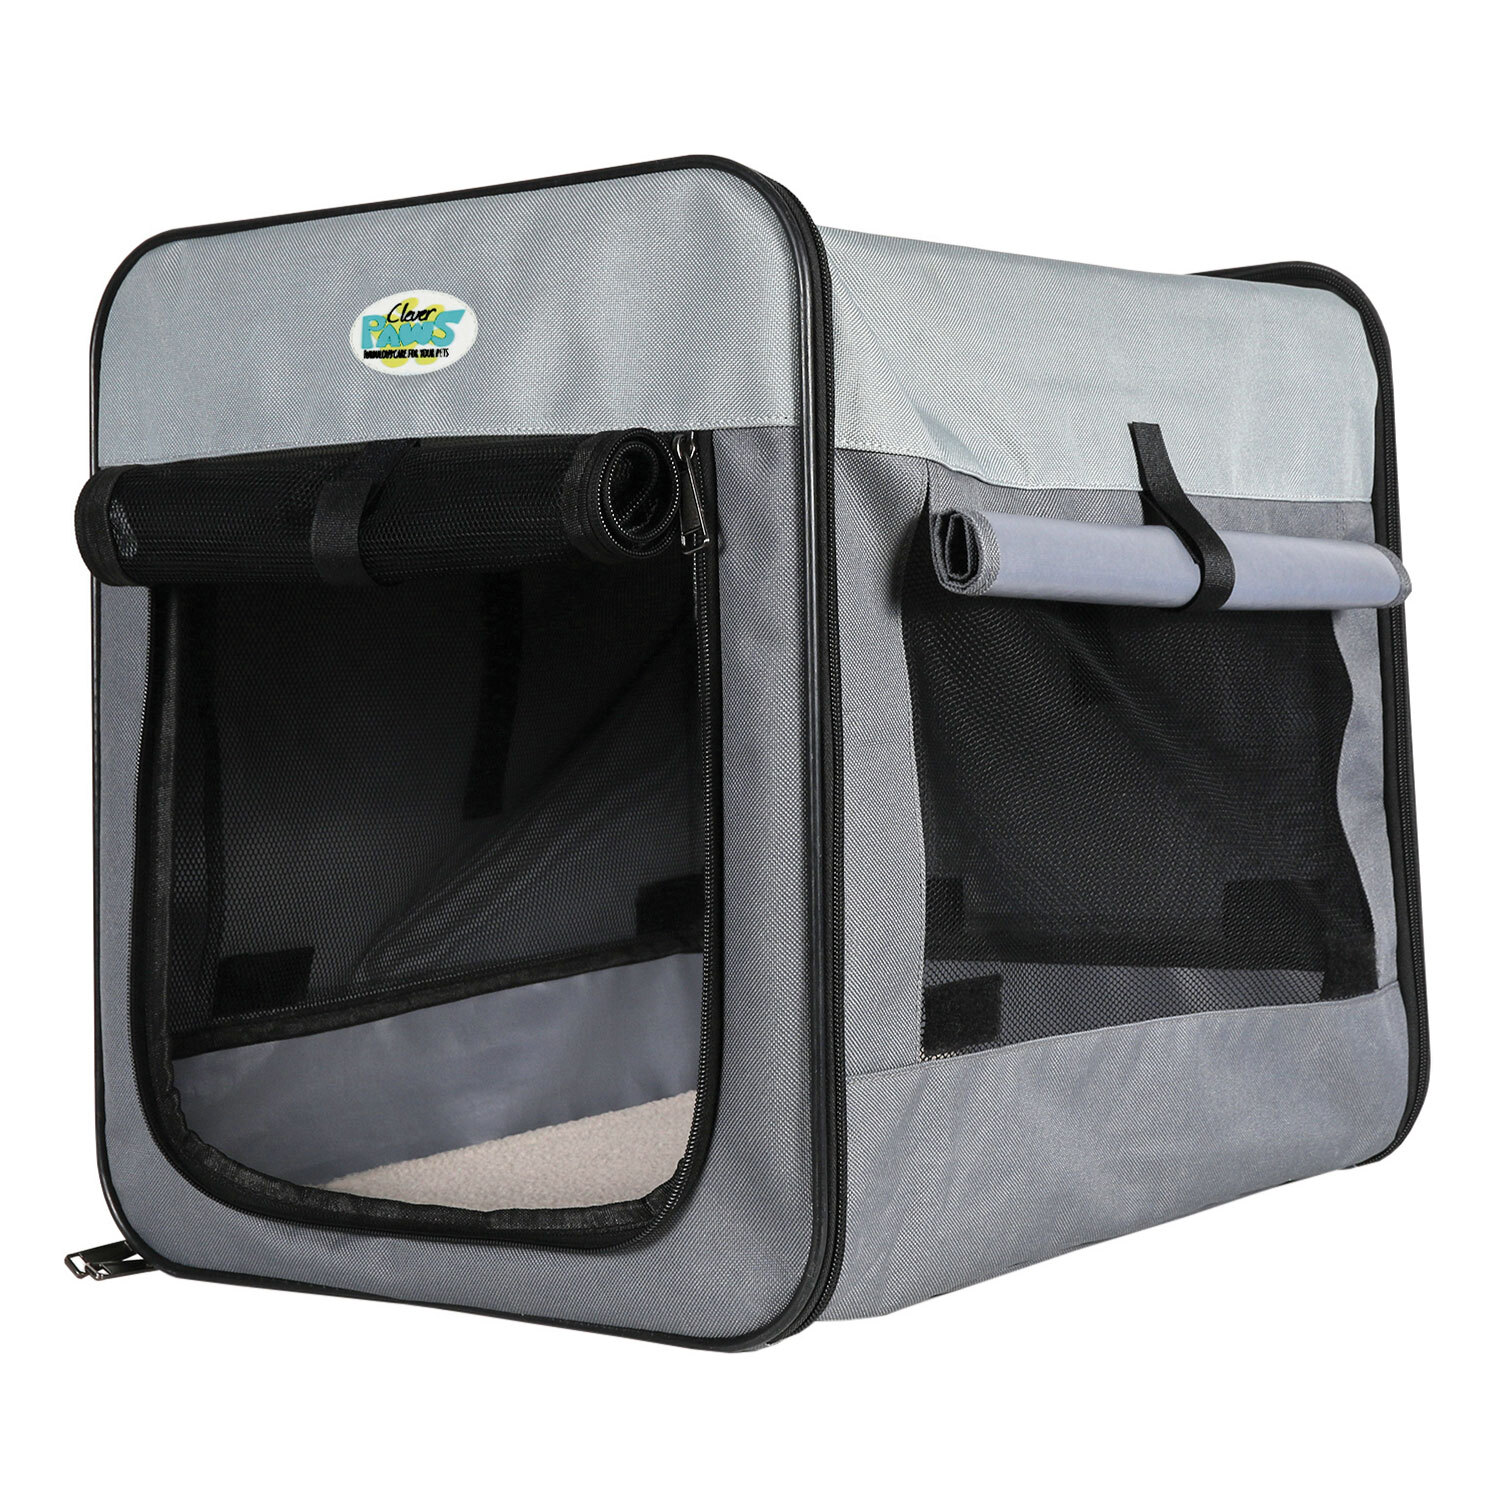 Clever Paws Jumbo Soft Pet Kennel Image 1